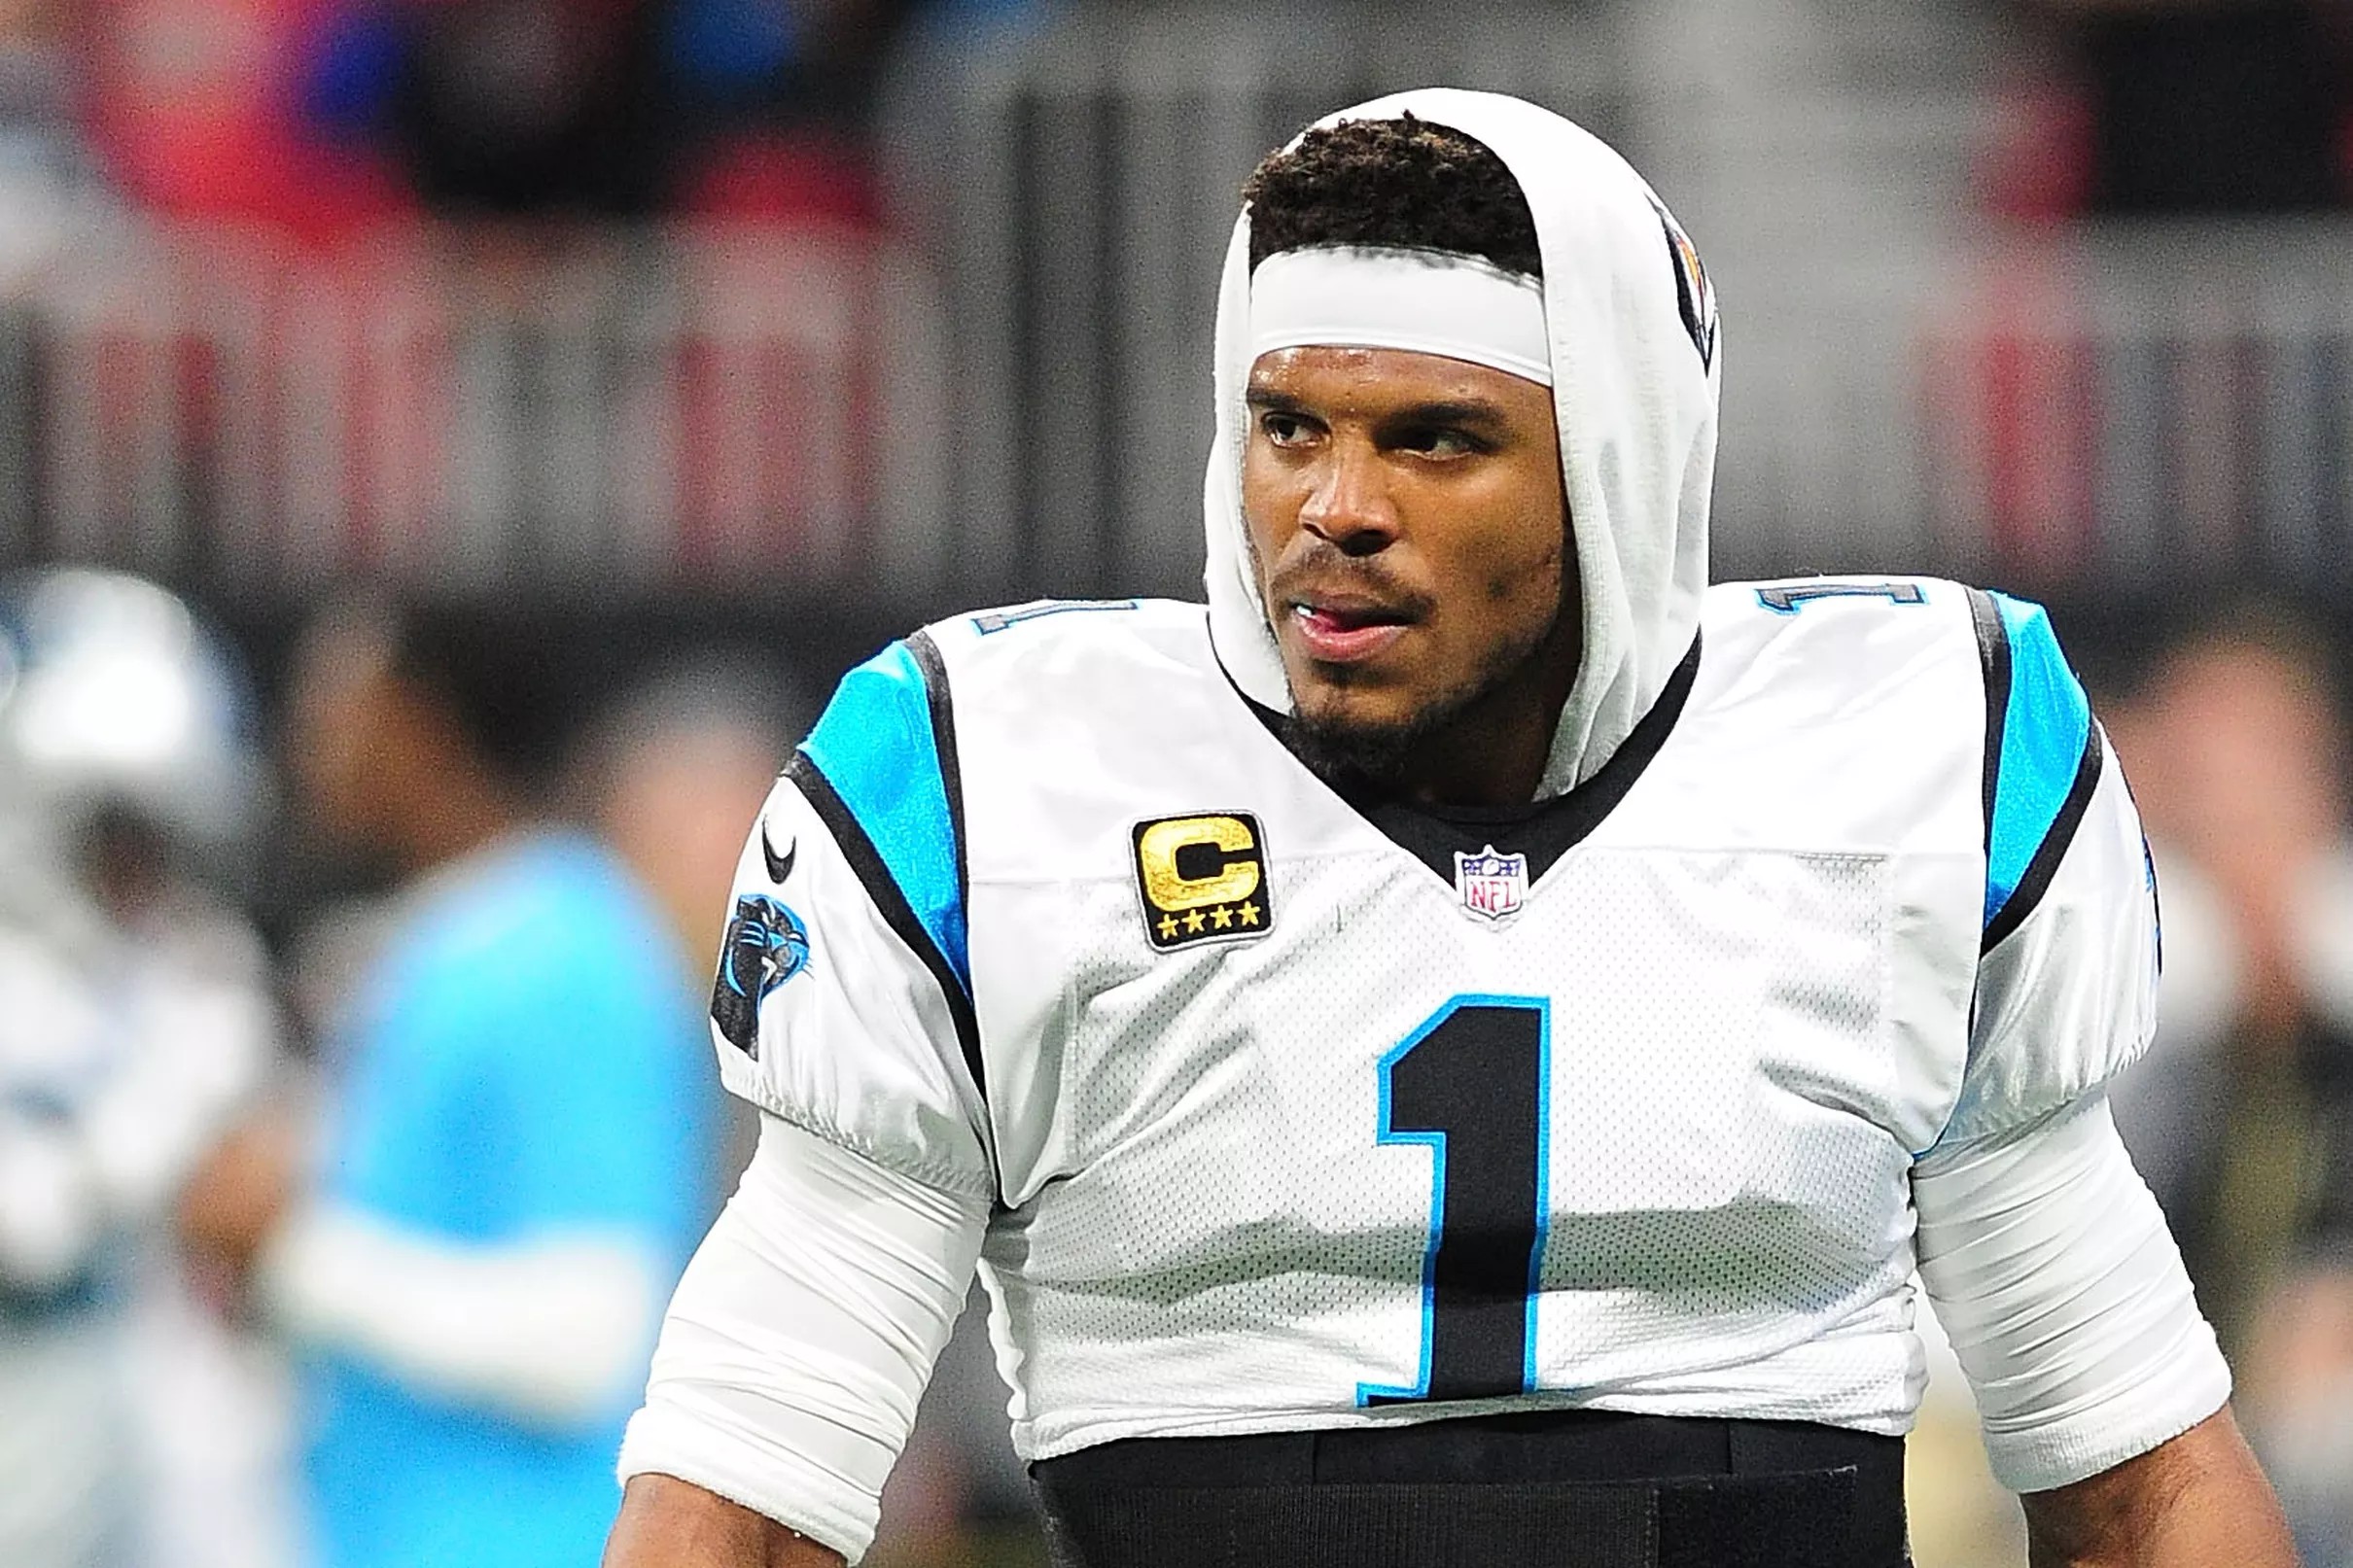 Five Carolina Panthers questions answered for today’s game